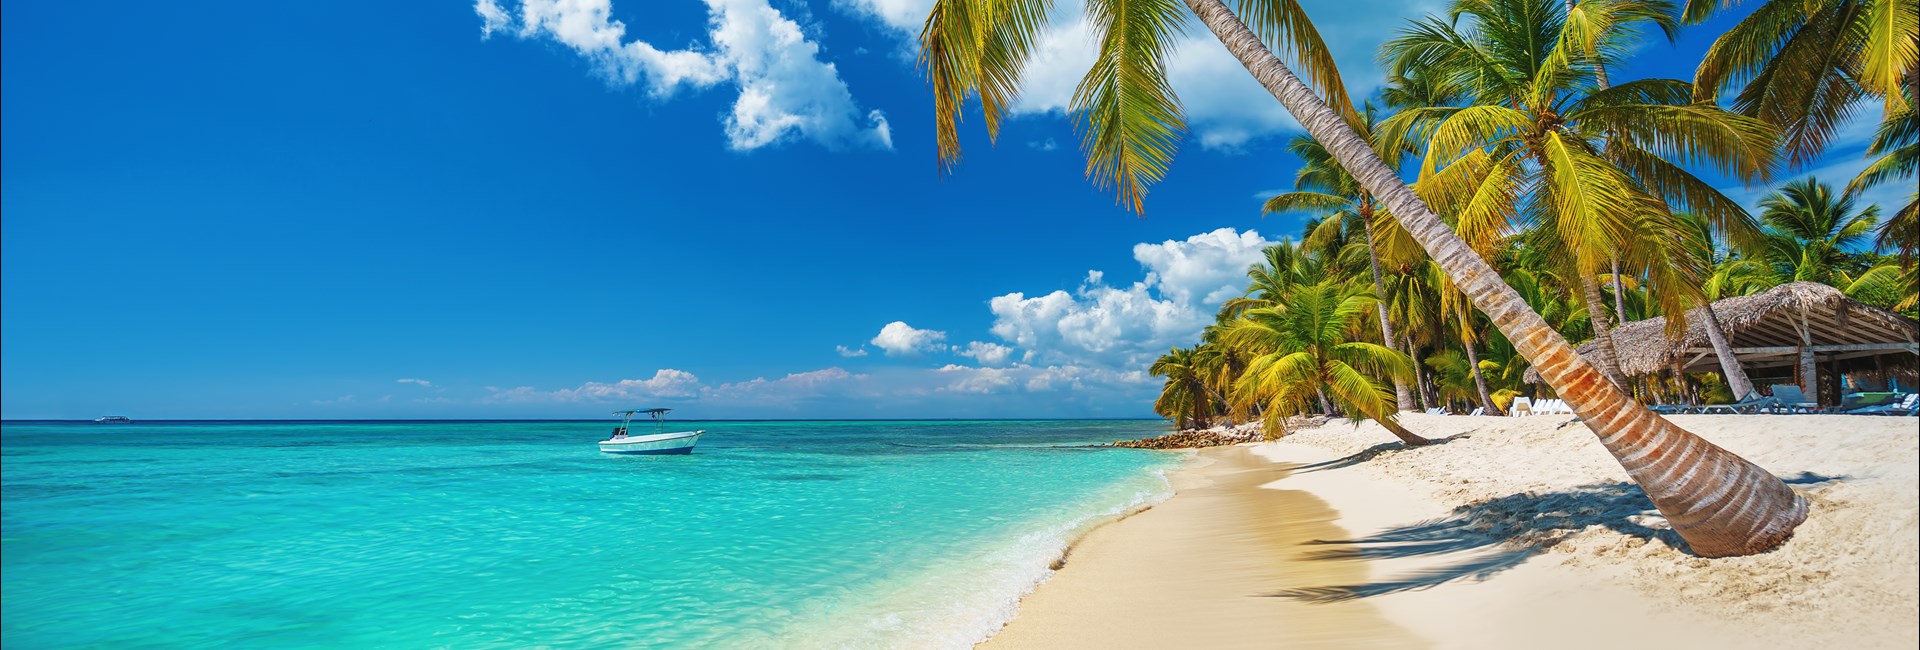  Tropical beach with large palm tree in Punta Cana